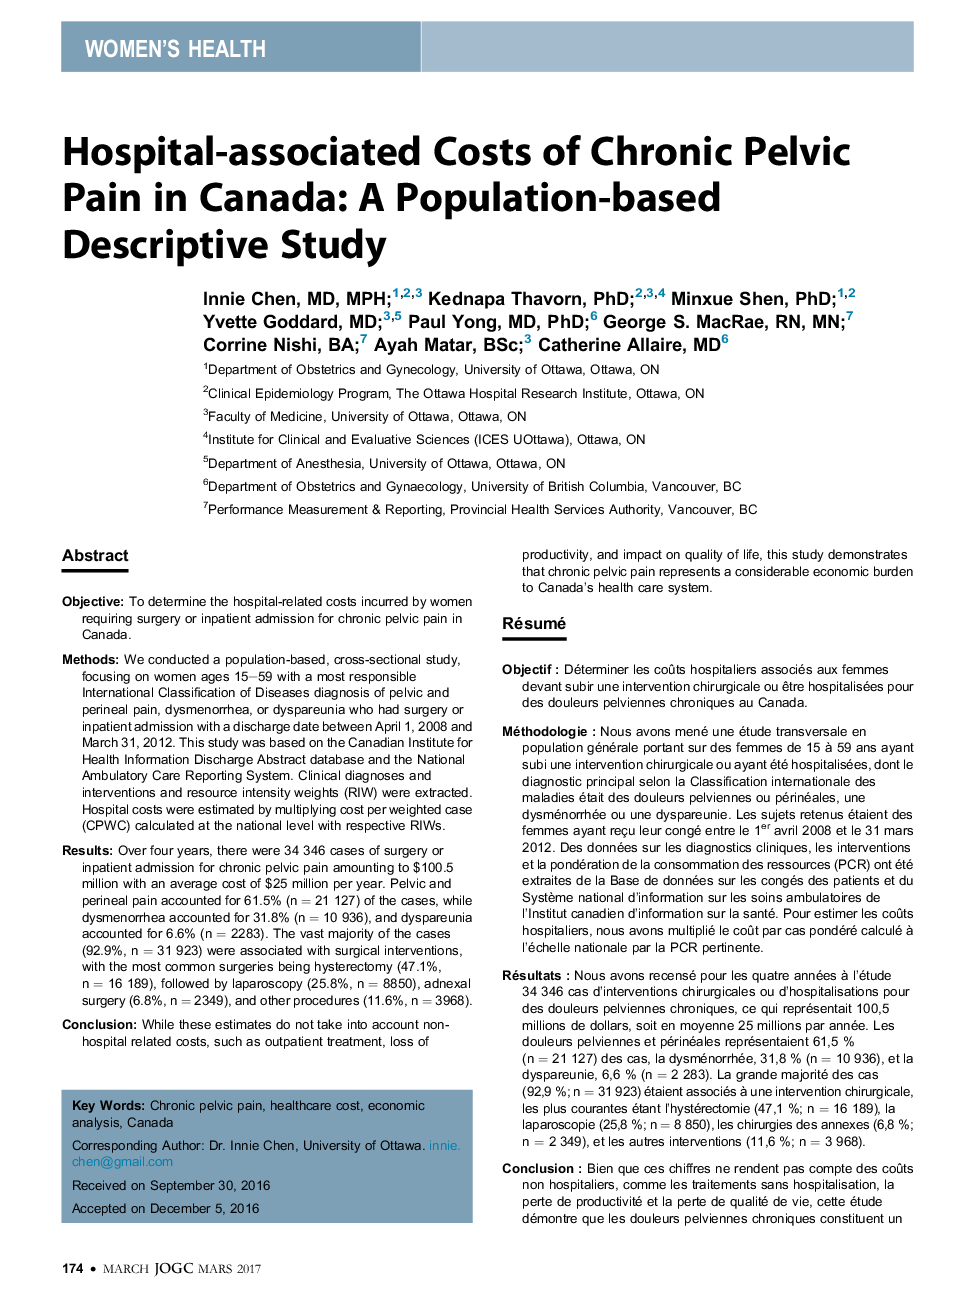 Hospital-associated Costs of Chronic Pelvic Pain in Canada: A Population-based Descriptive Study